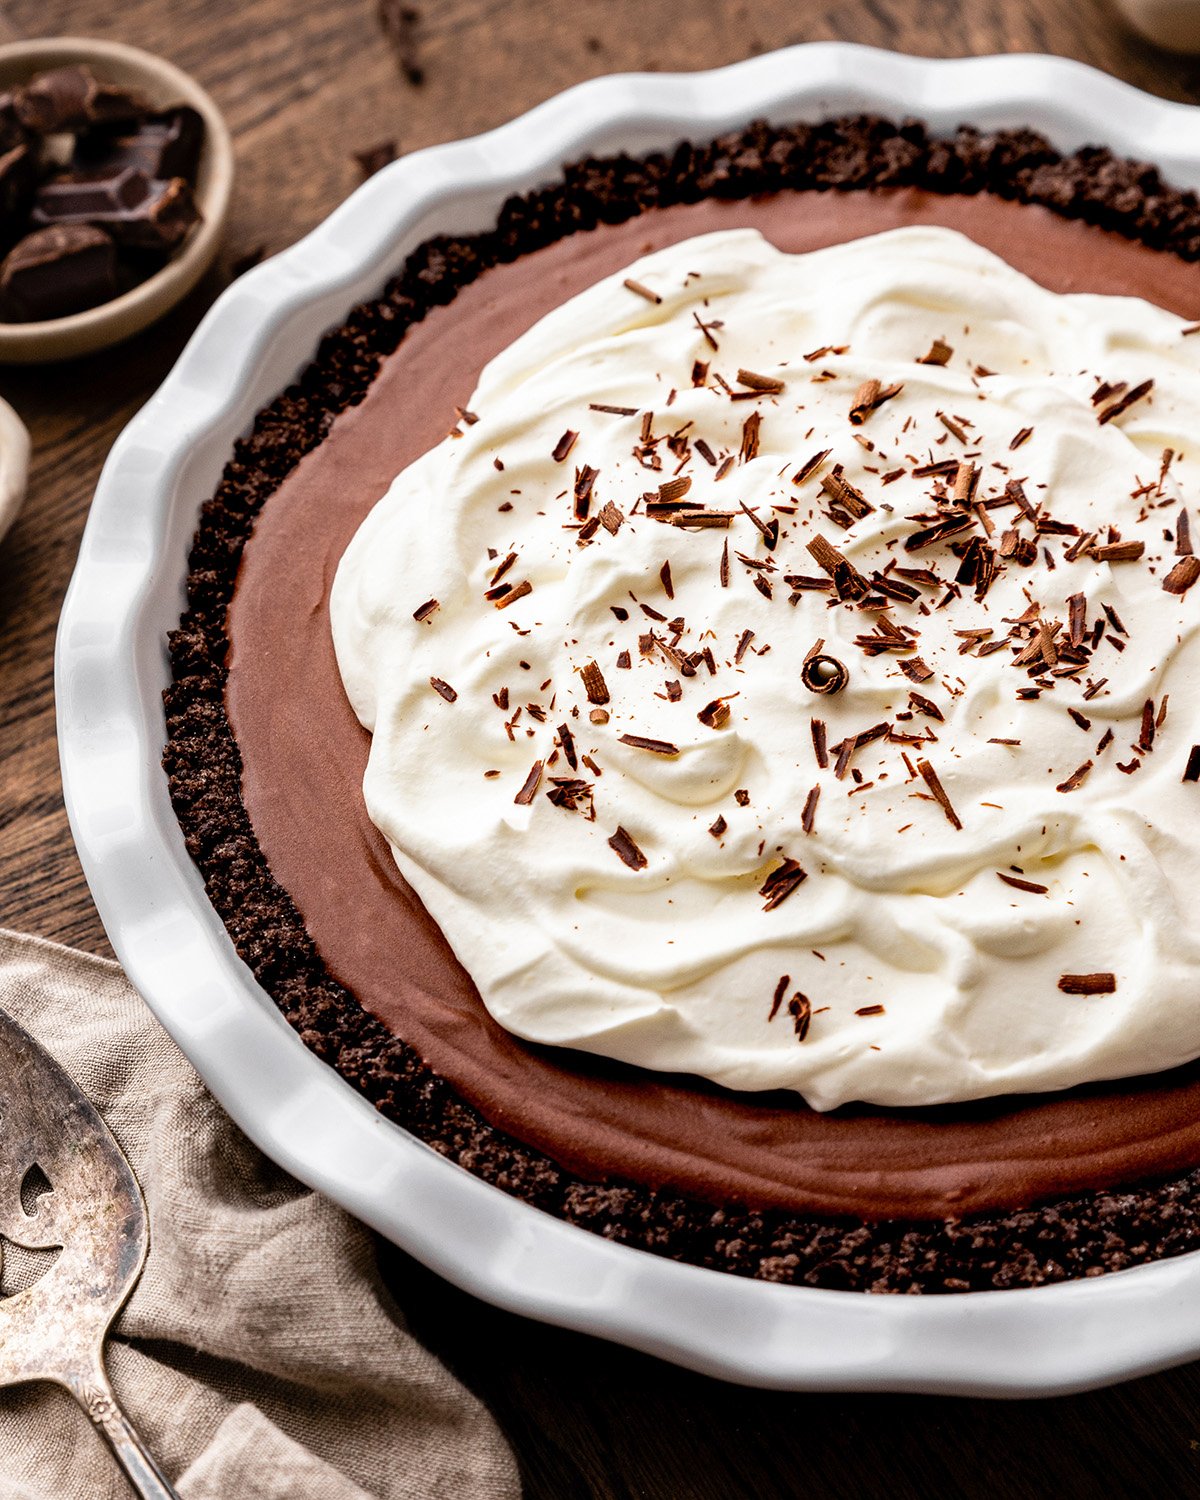 Chocolate Pudding Pie with whipped cream and chocolate shavings 